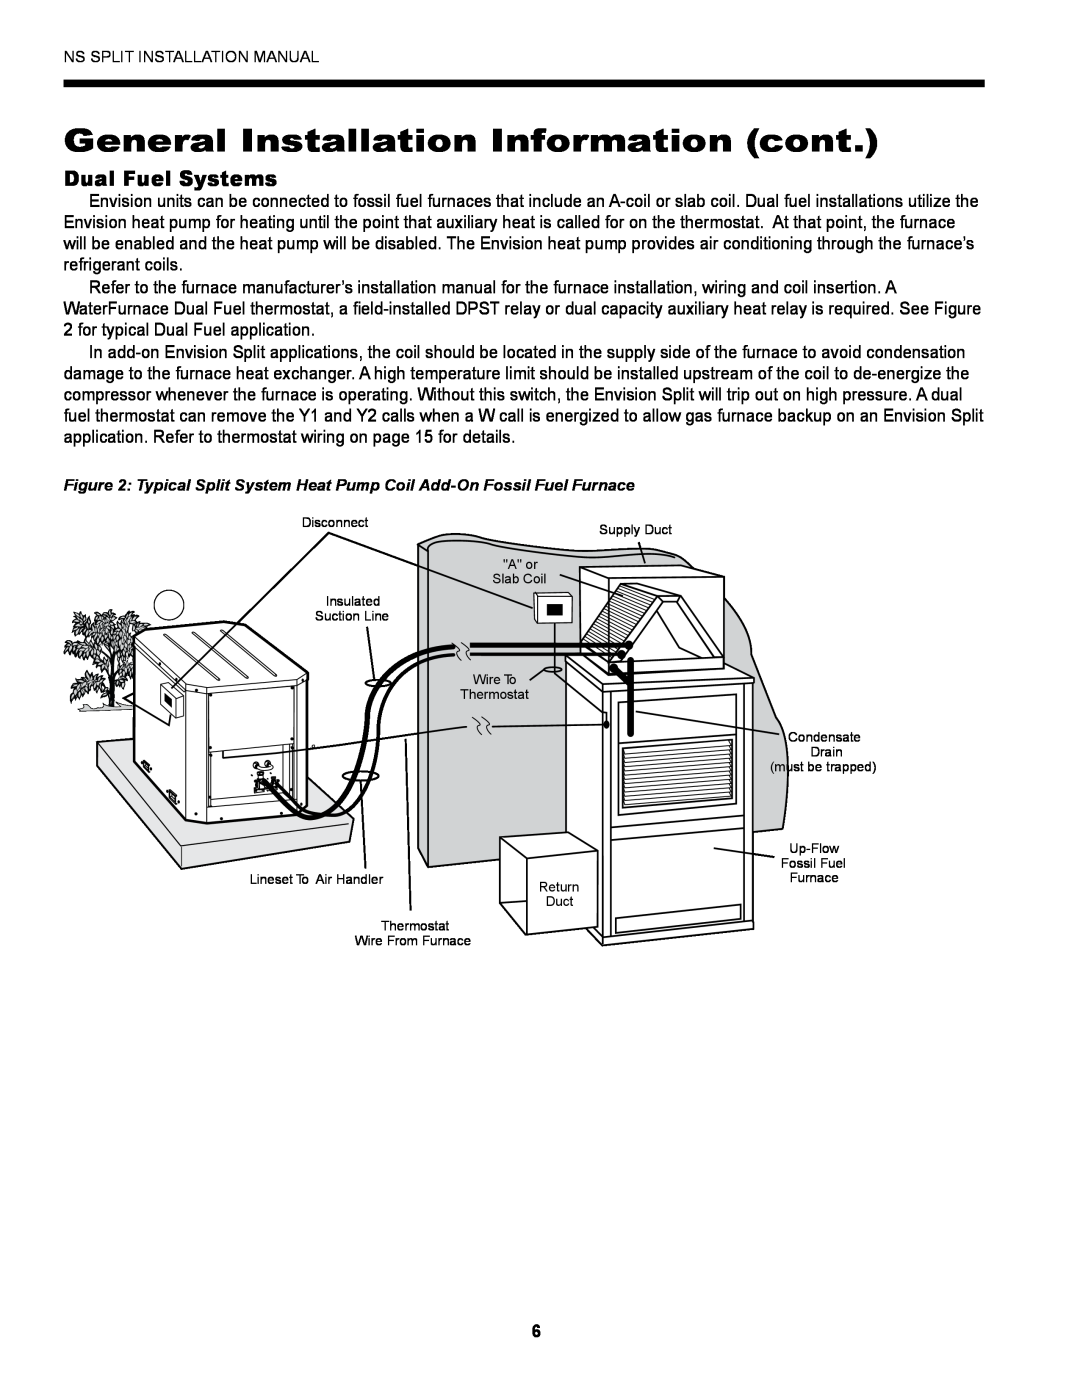 Envision Peripherals Series installation manual General Installation Information cont, Dual Fuel Systems 